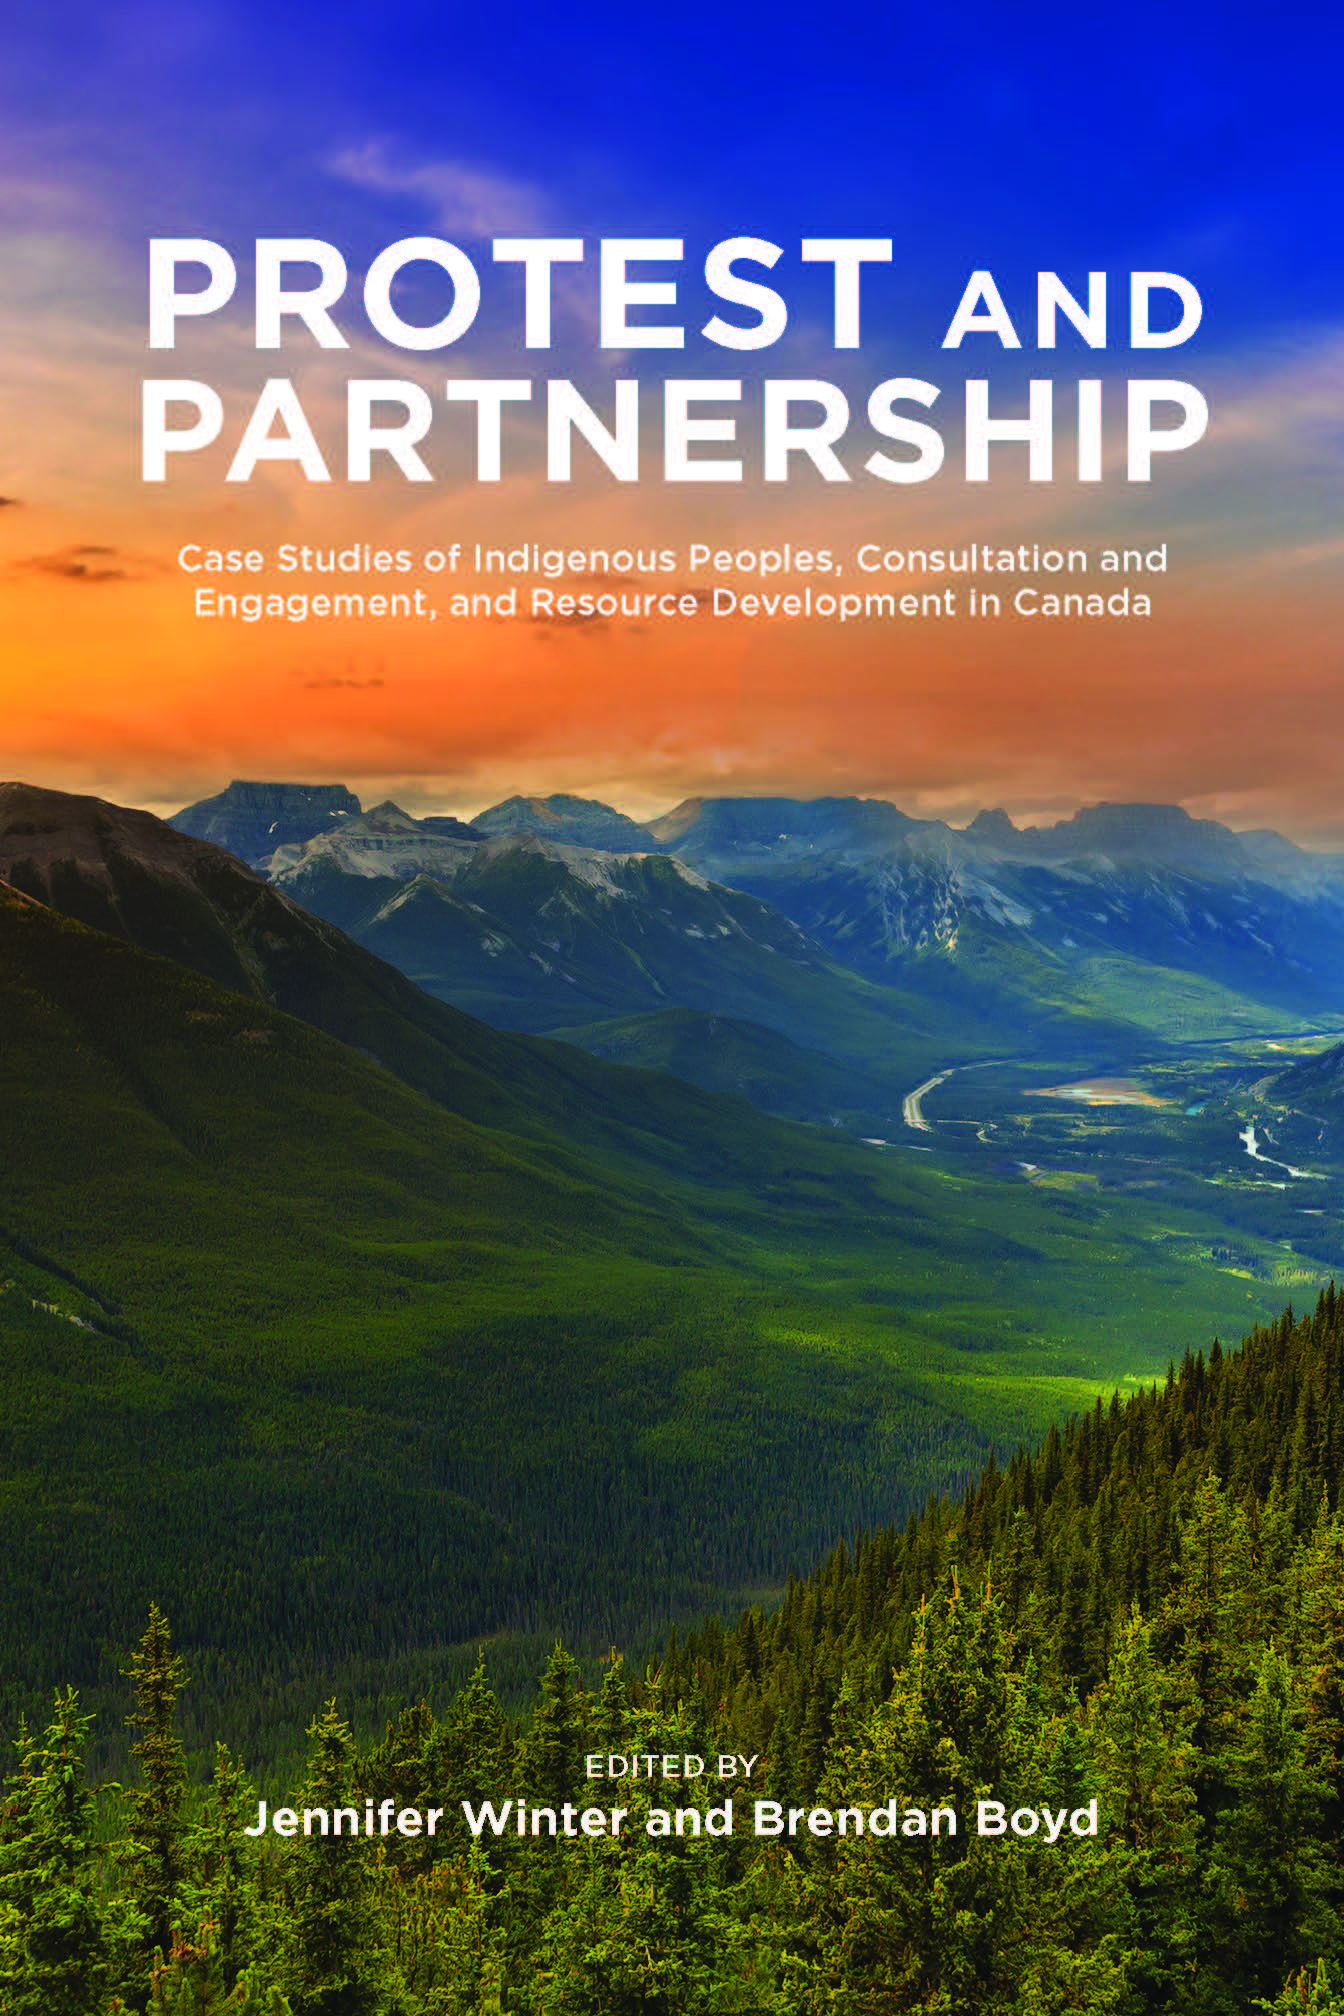 Book cover image for: Protest and Partnership